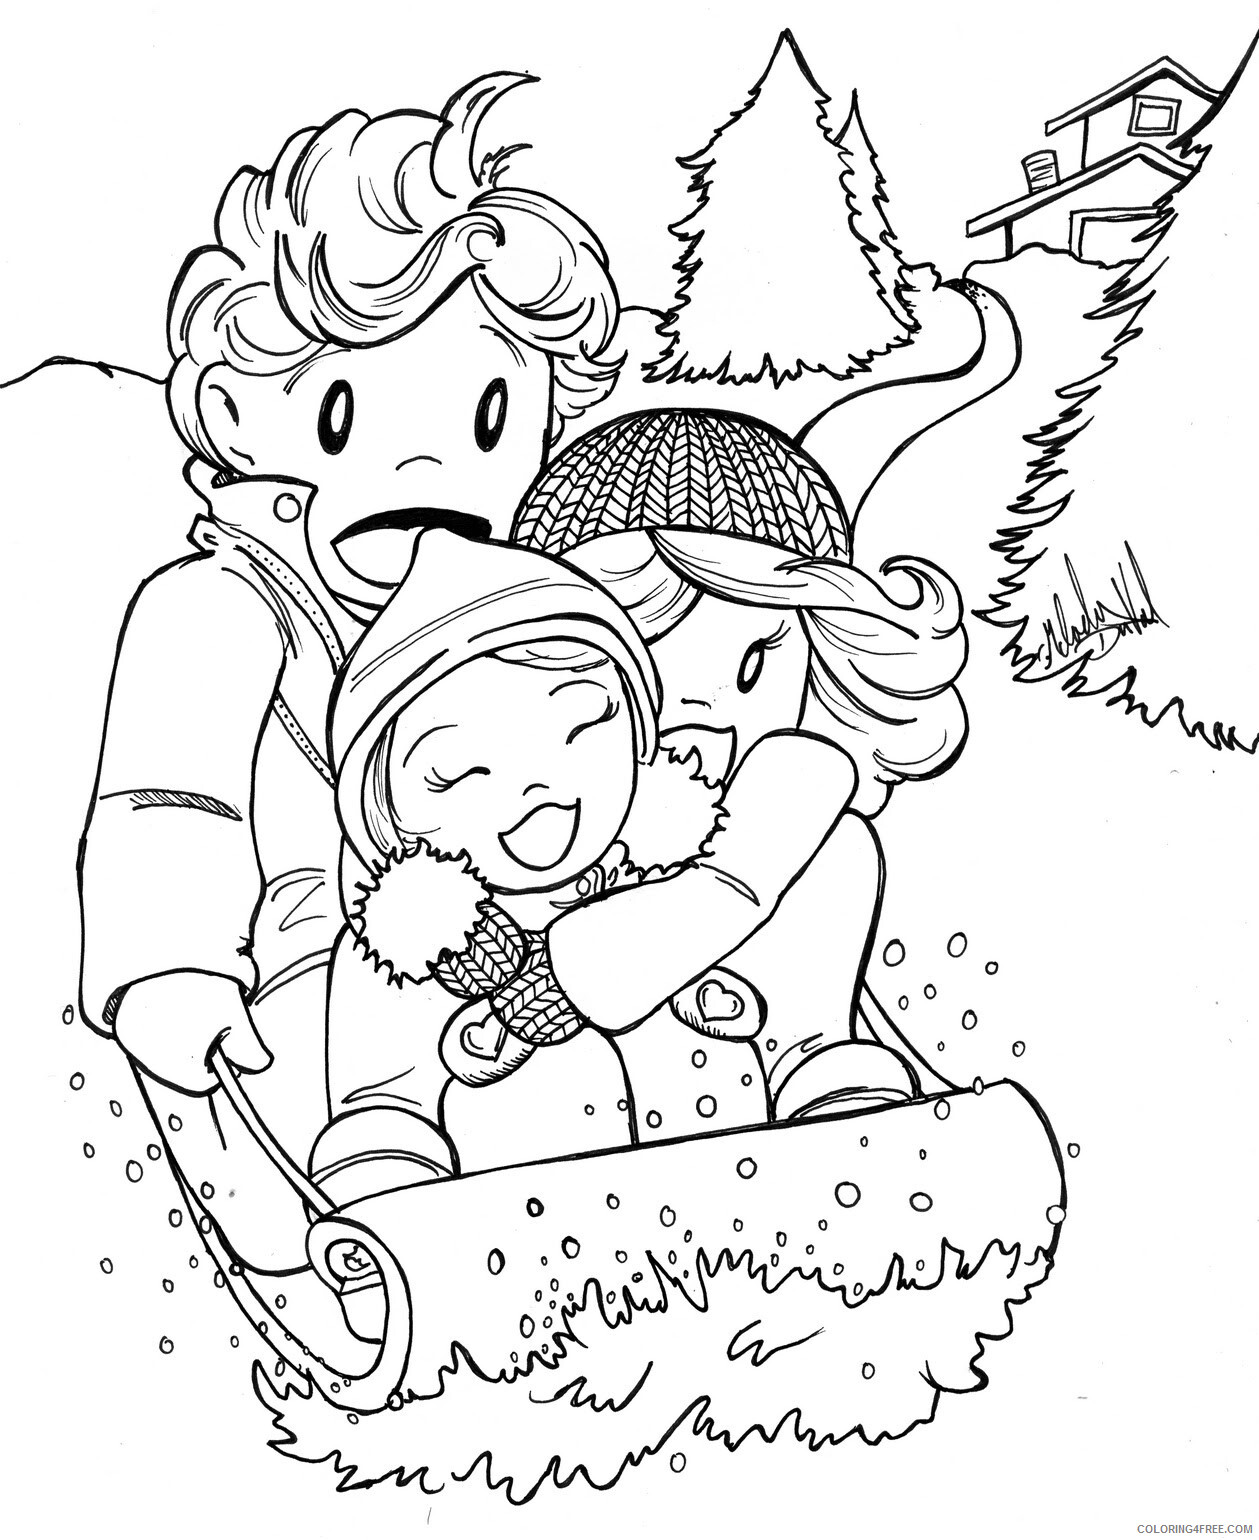 January Coloring Pages Sledding in January Printable 2021 3562 Coloring4free